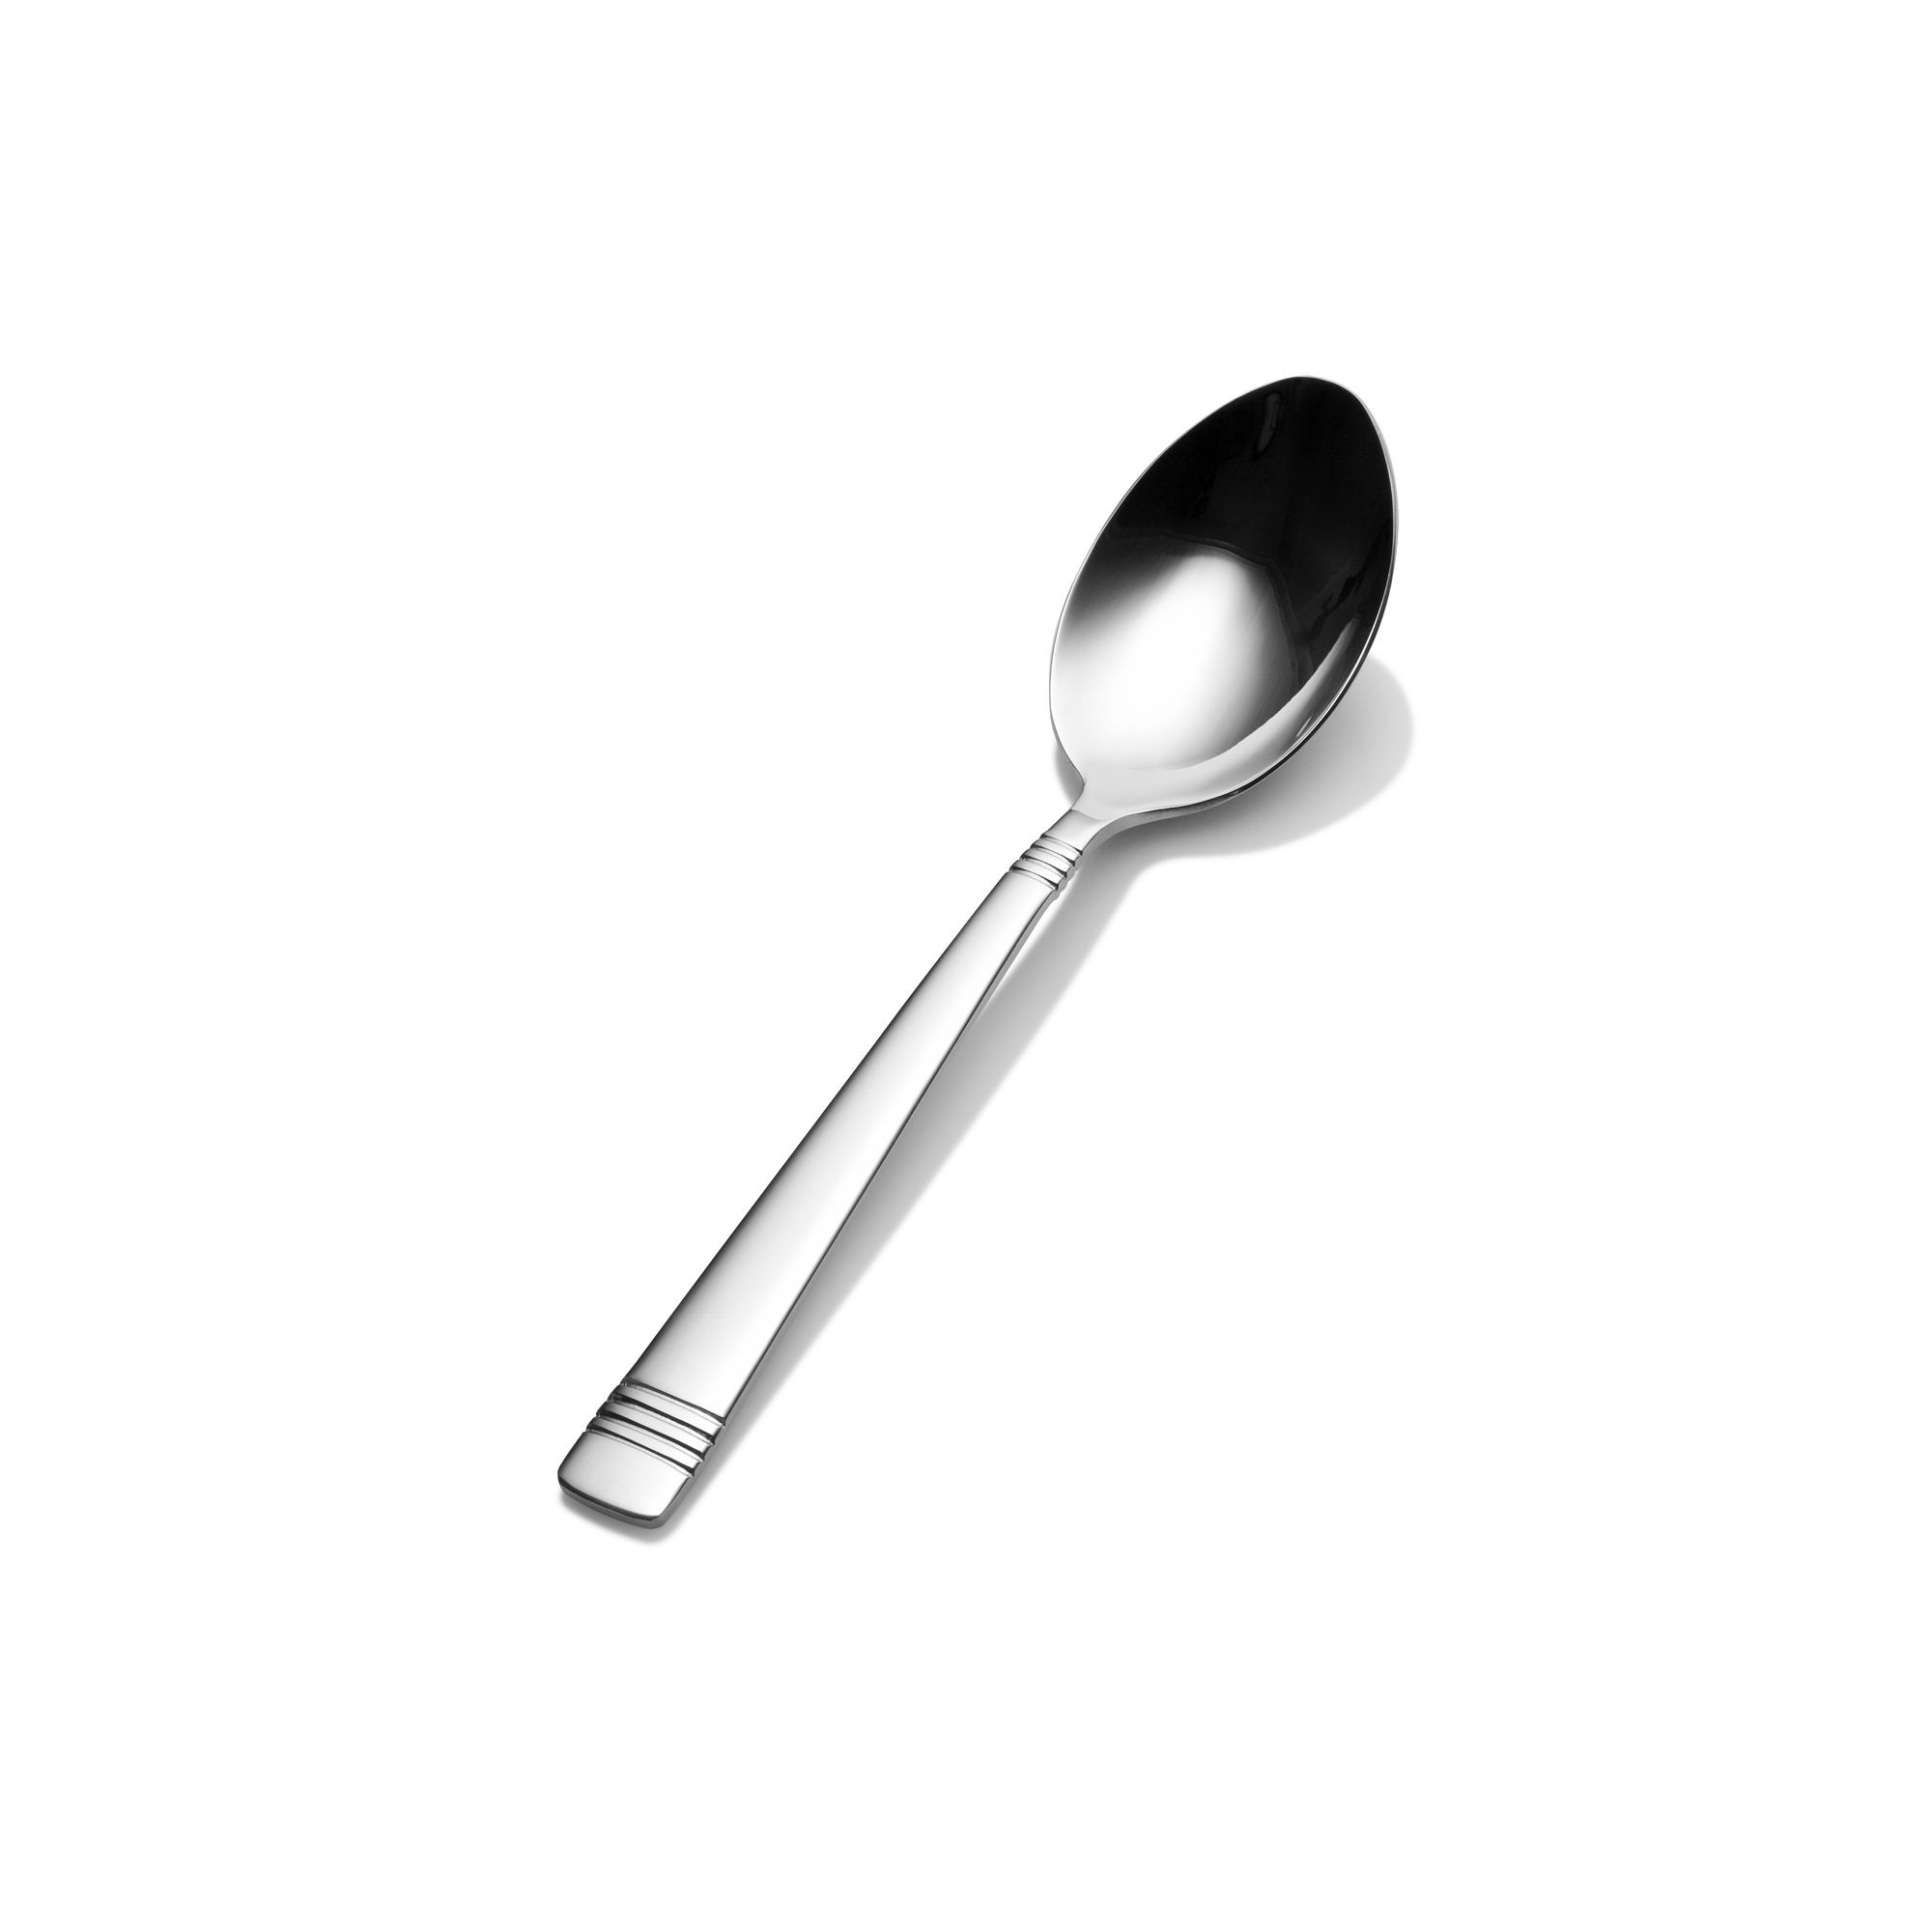 Bon Chef S2603 Julia 18/8 Stainless Steel Soup and Dessert Spoon